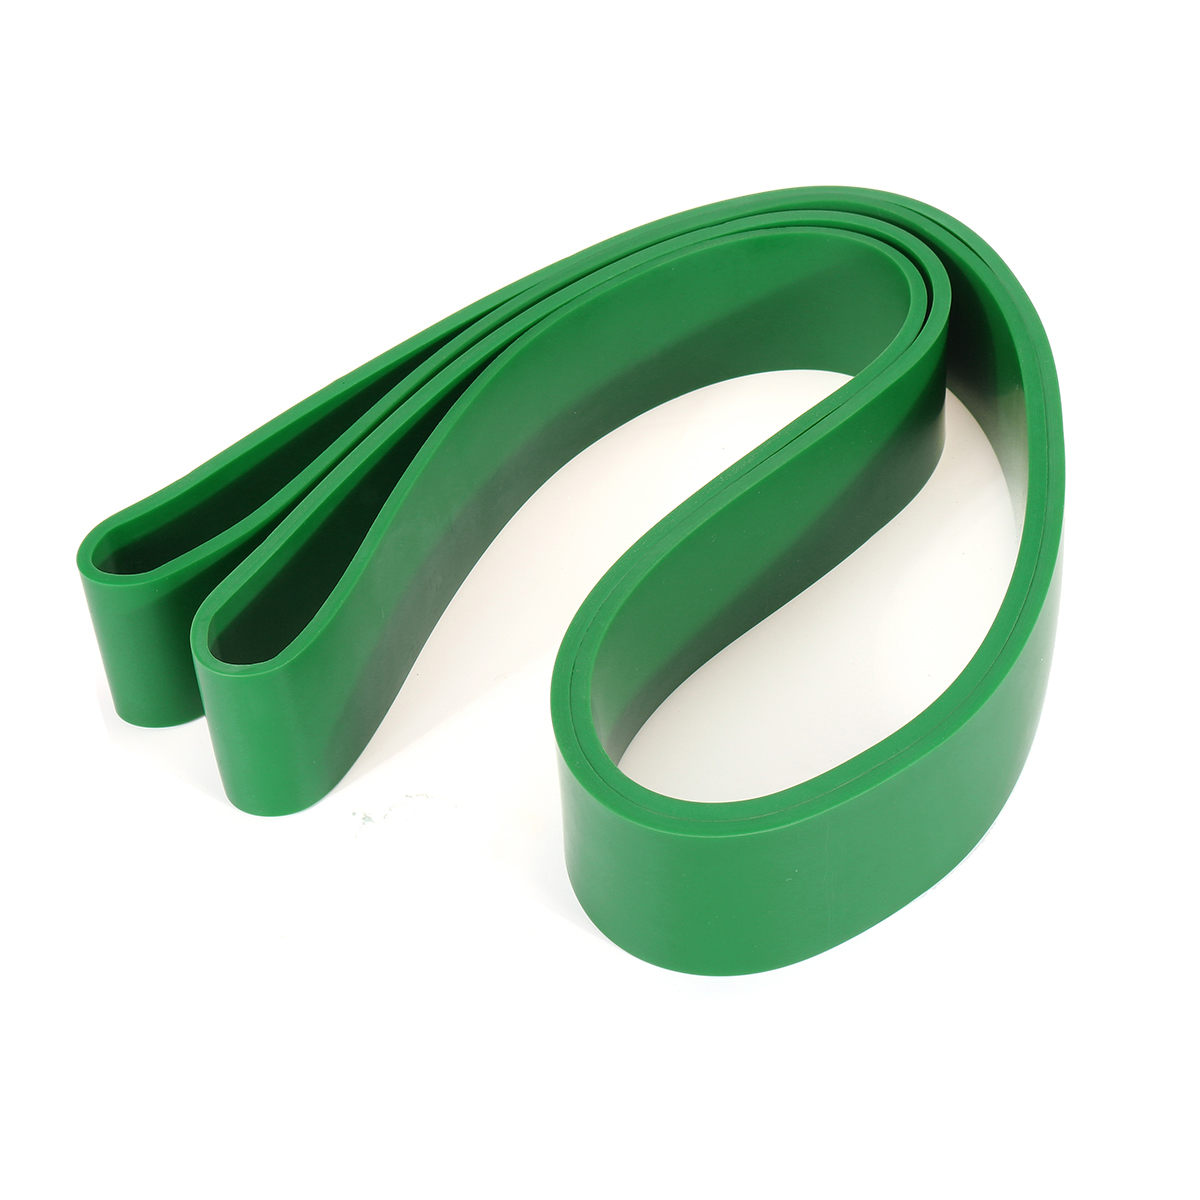 Latex Resistance Bands Sports Yoga Pull Up Elastic Rope Fitness Strength Training Band